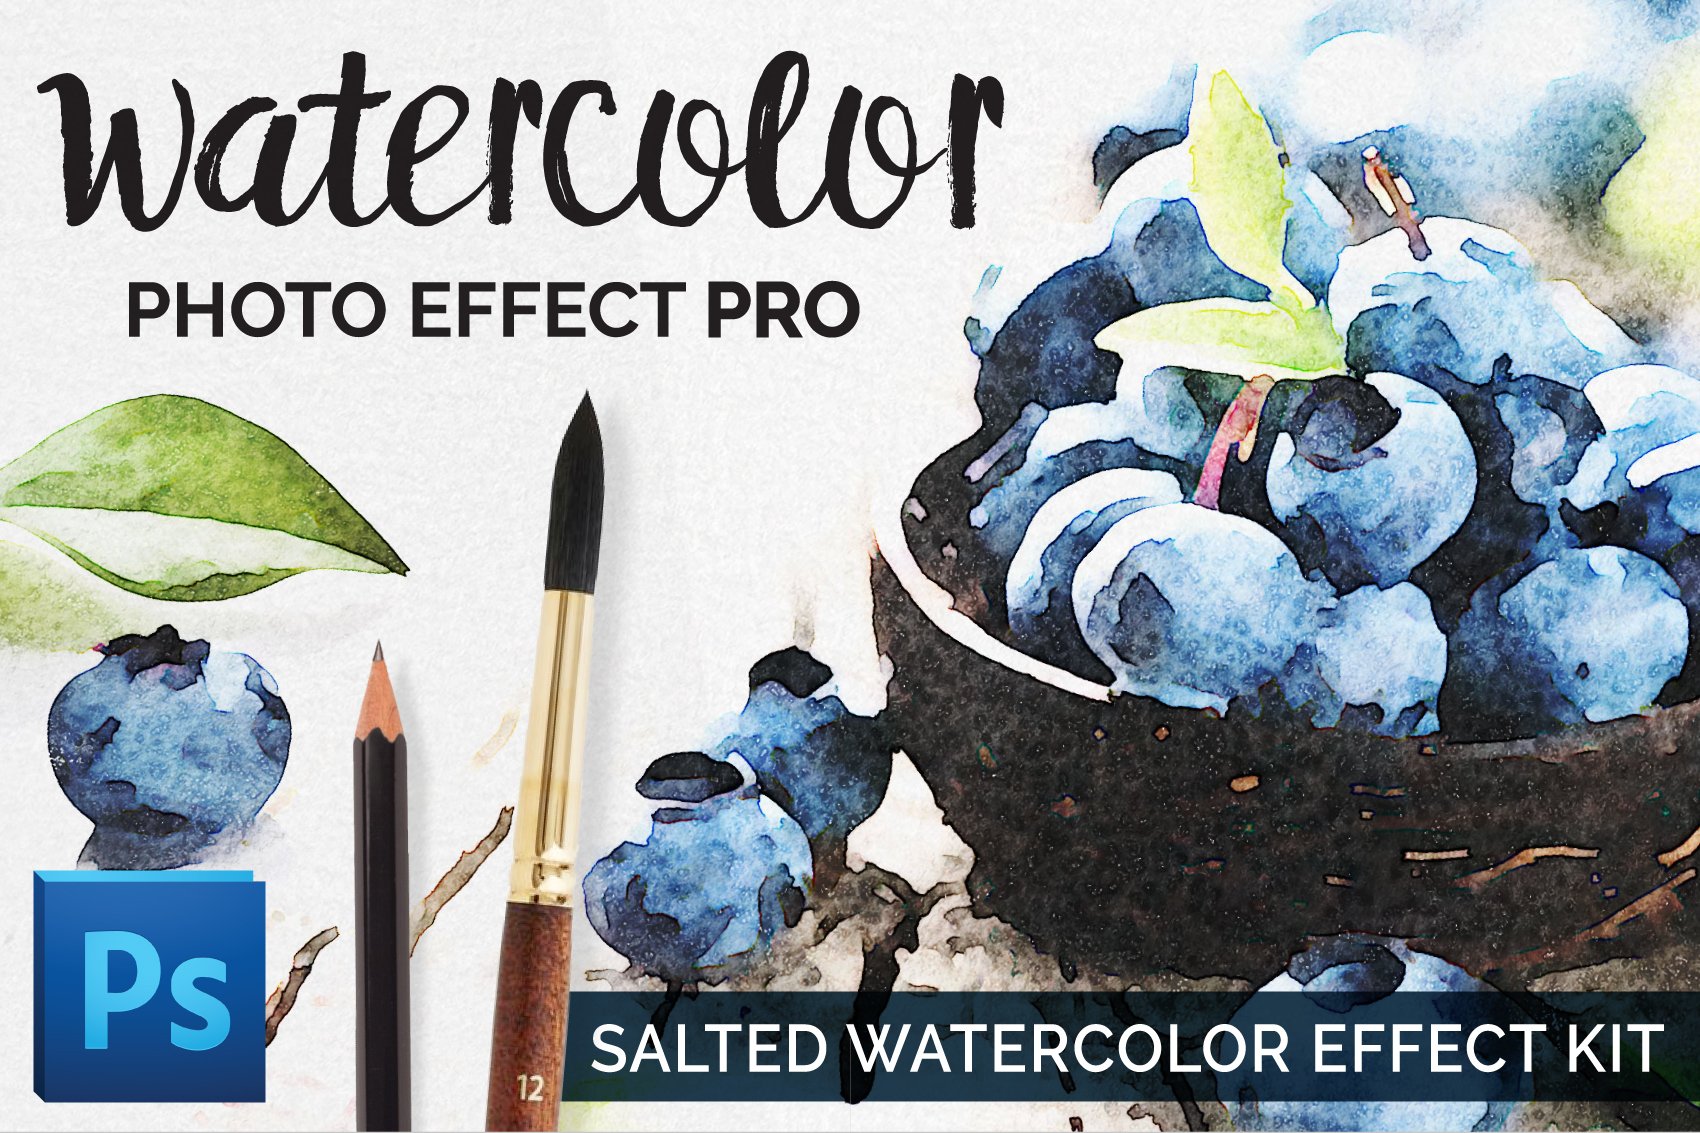 Watercolor Photo Effect - Saltedcover image.